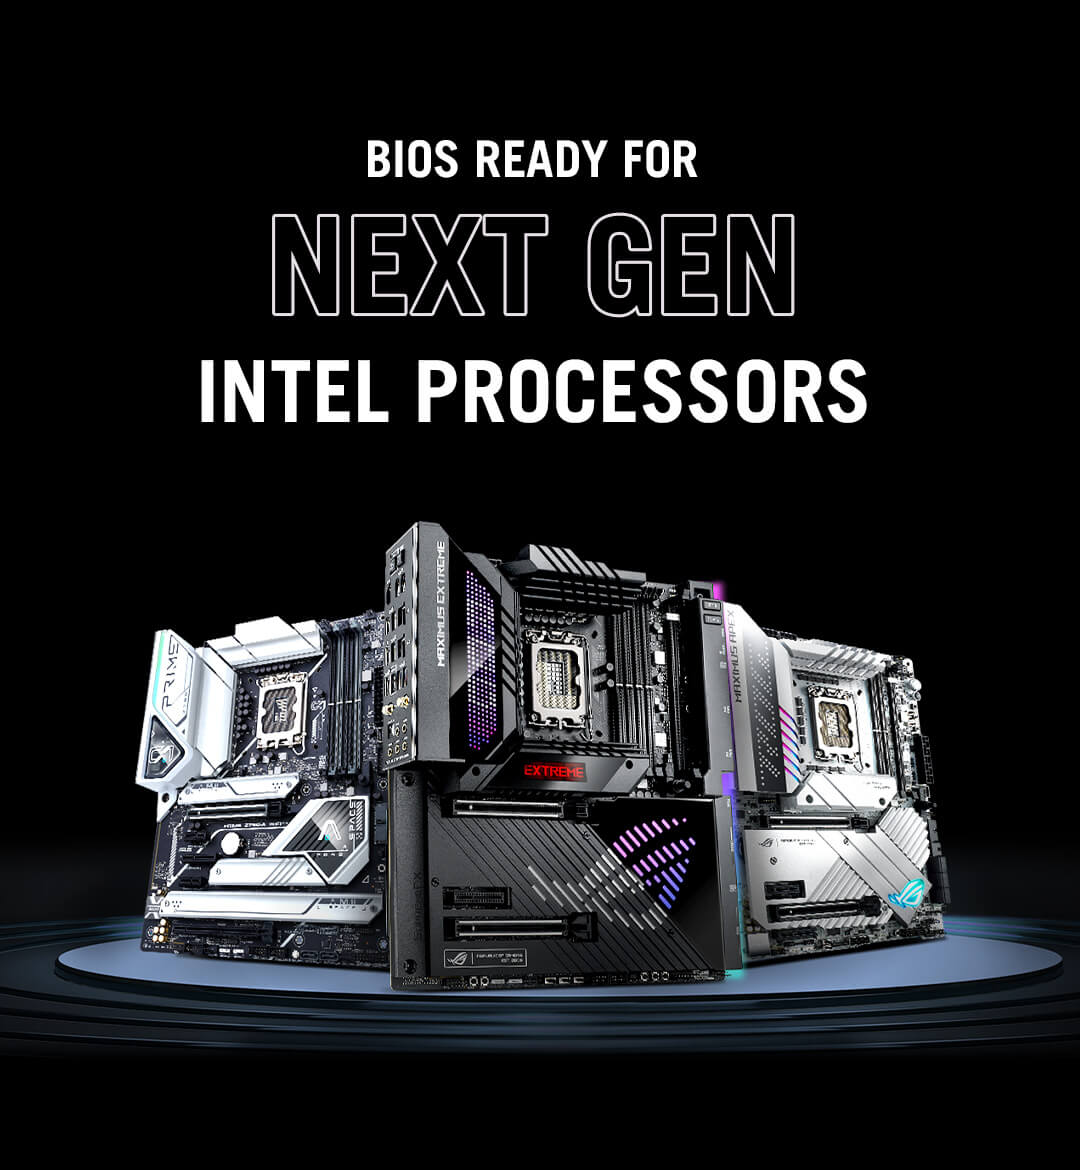 Three Z790 motherboards image with BIOS Ready for 14th gen Intel Processors